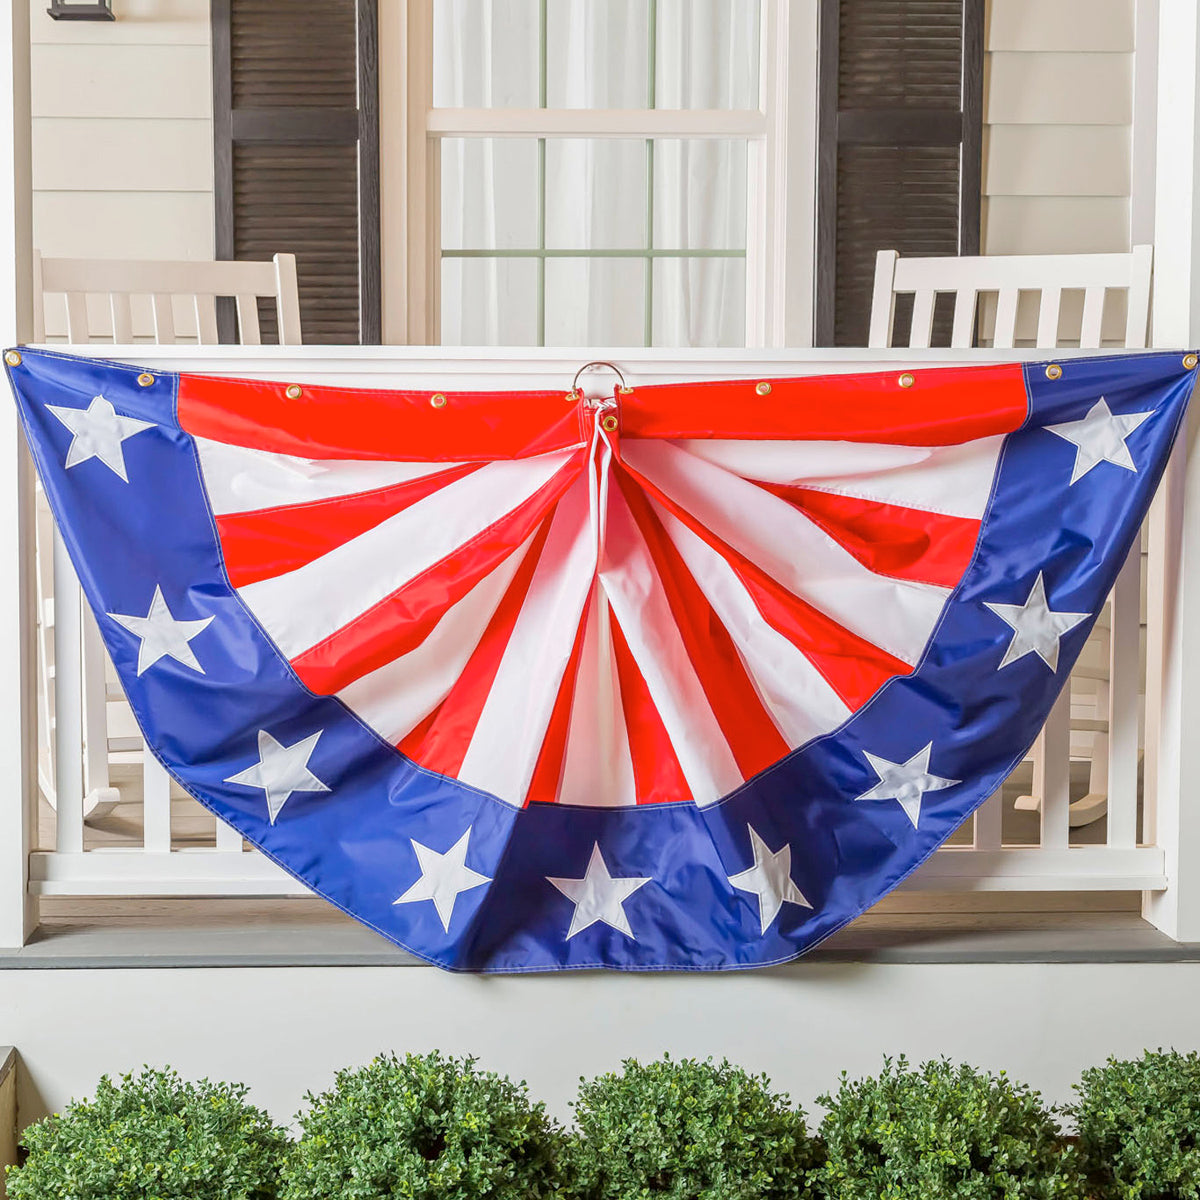 Stars and Stripes Bunting, 2 sizes